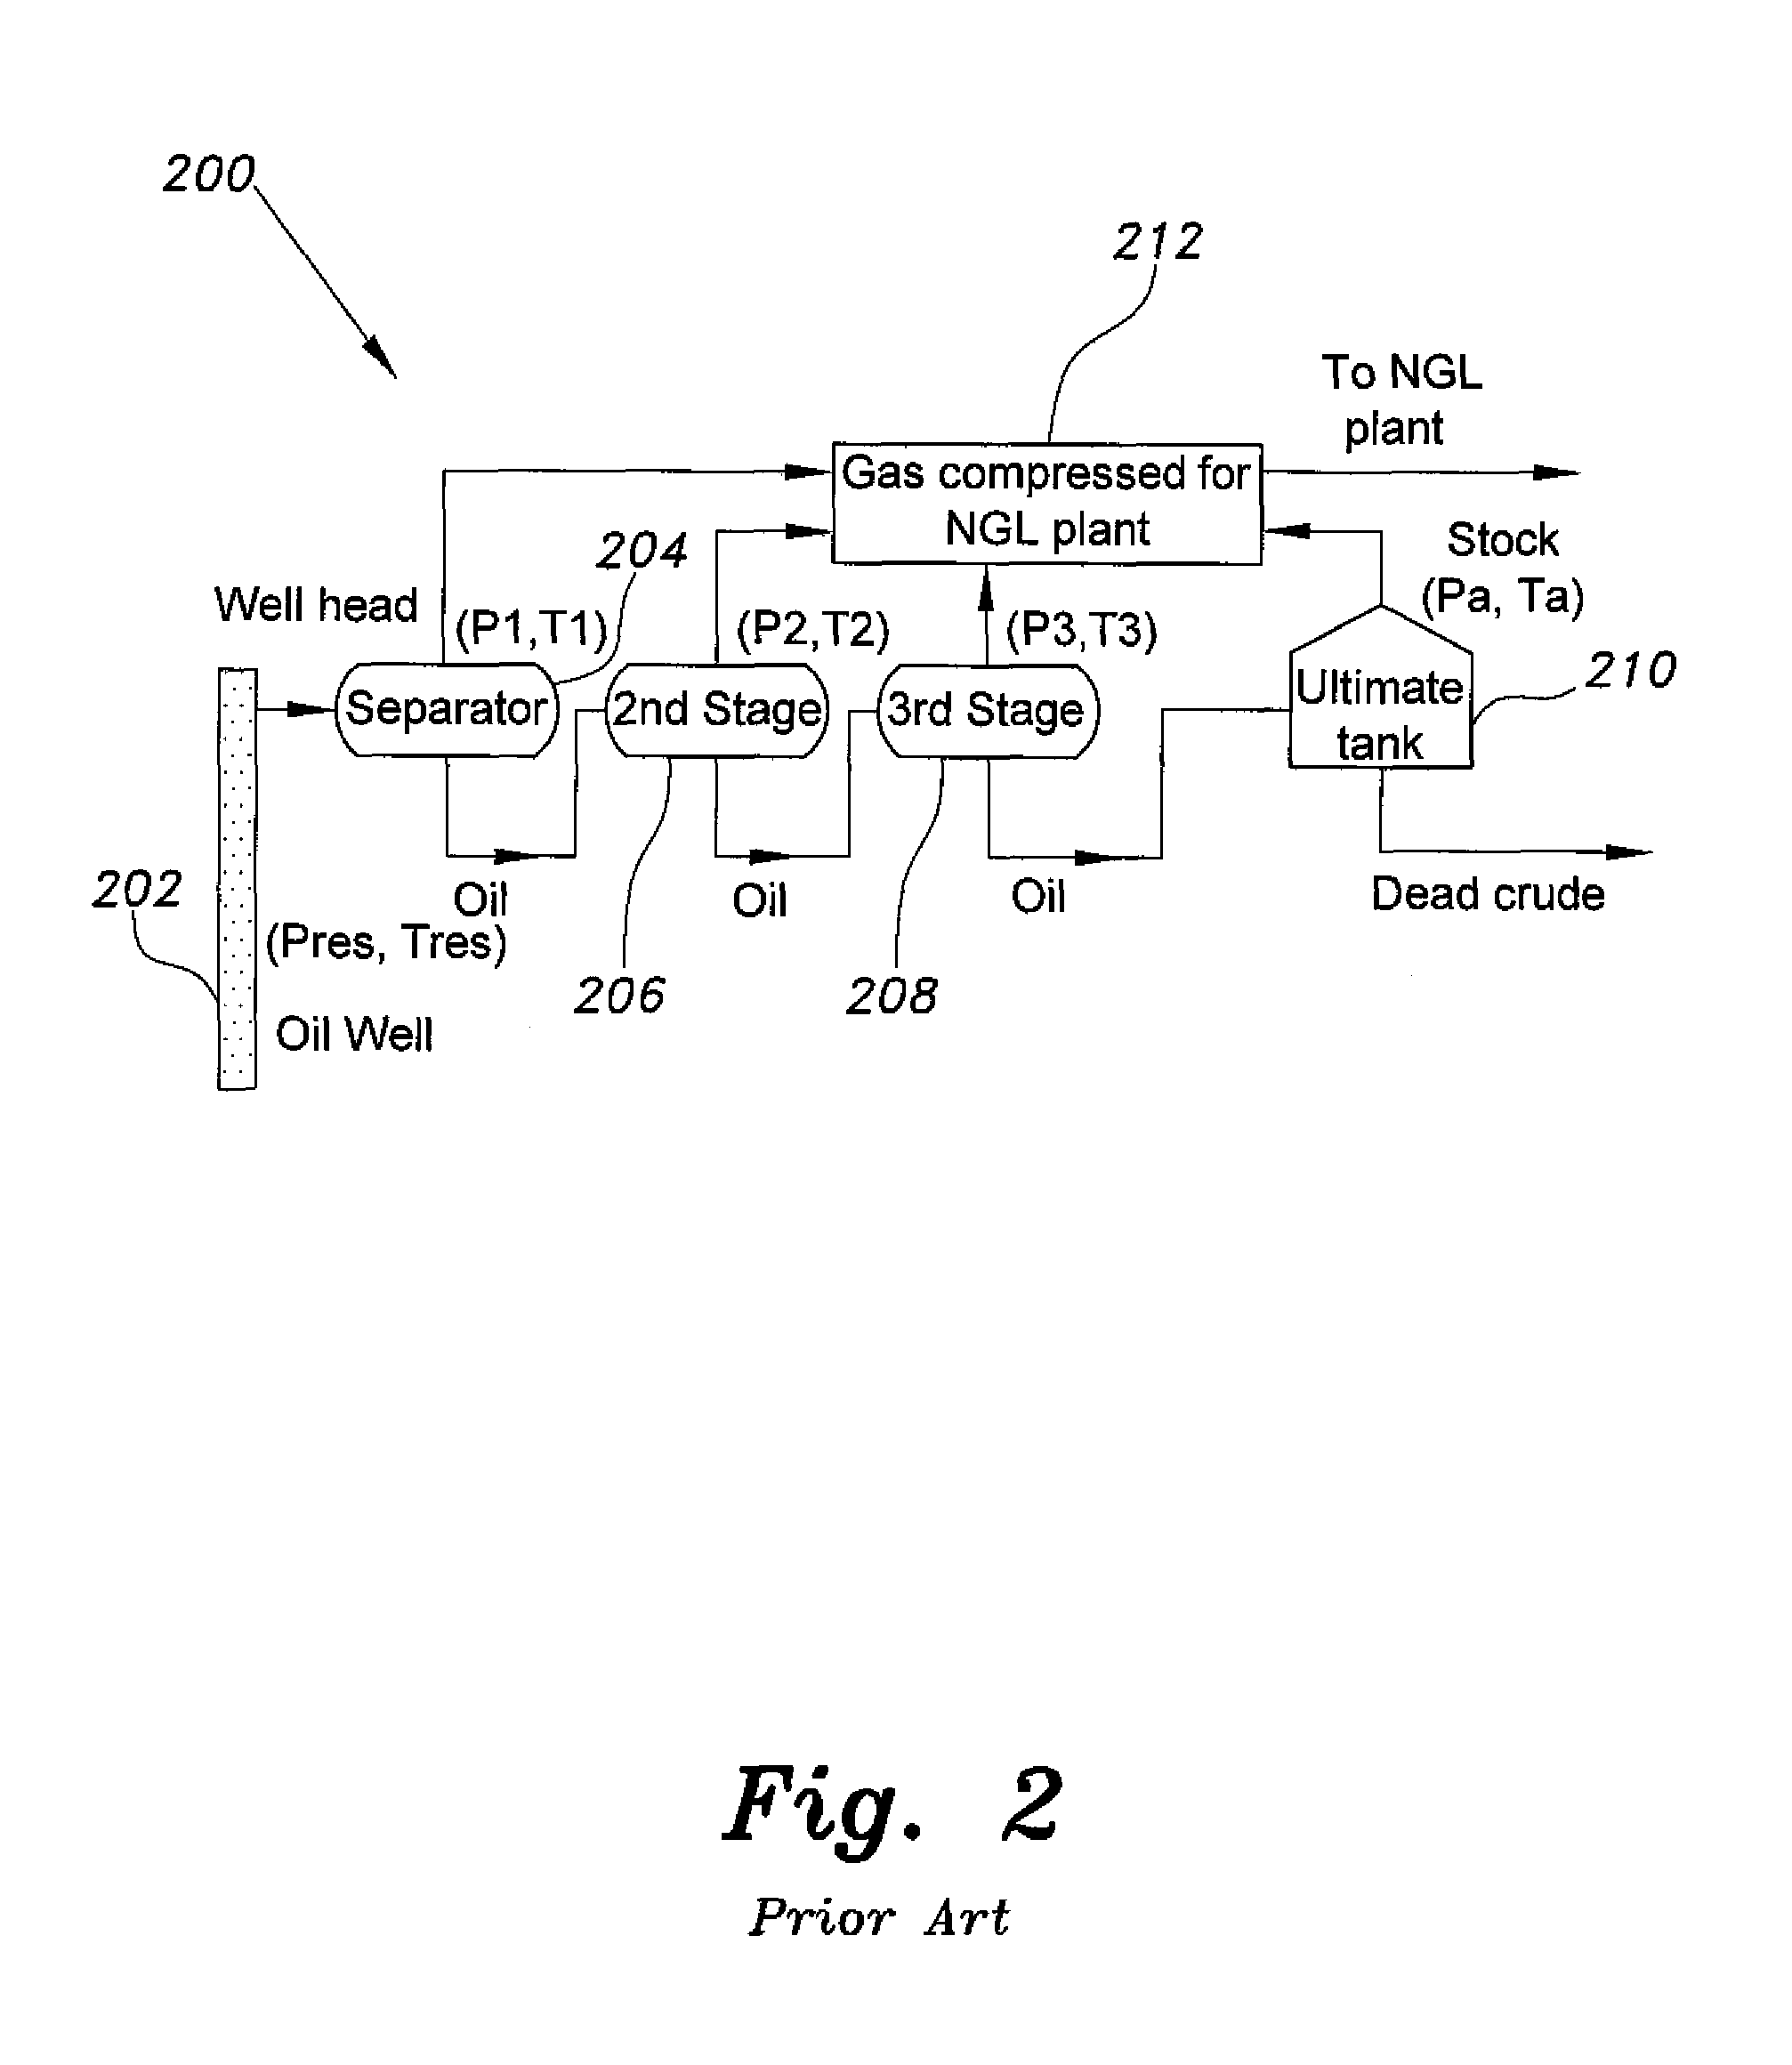 Method for optimizing and controlling pressure in gas-oil separation plants